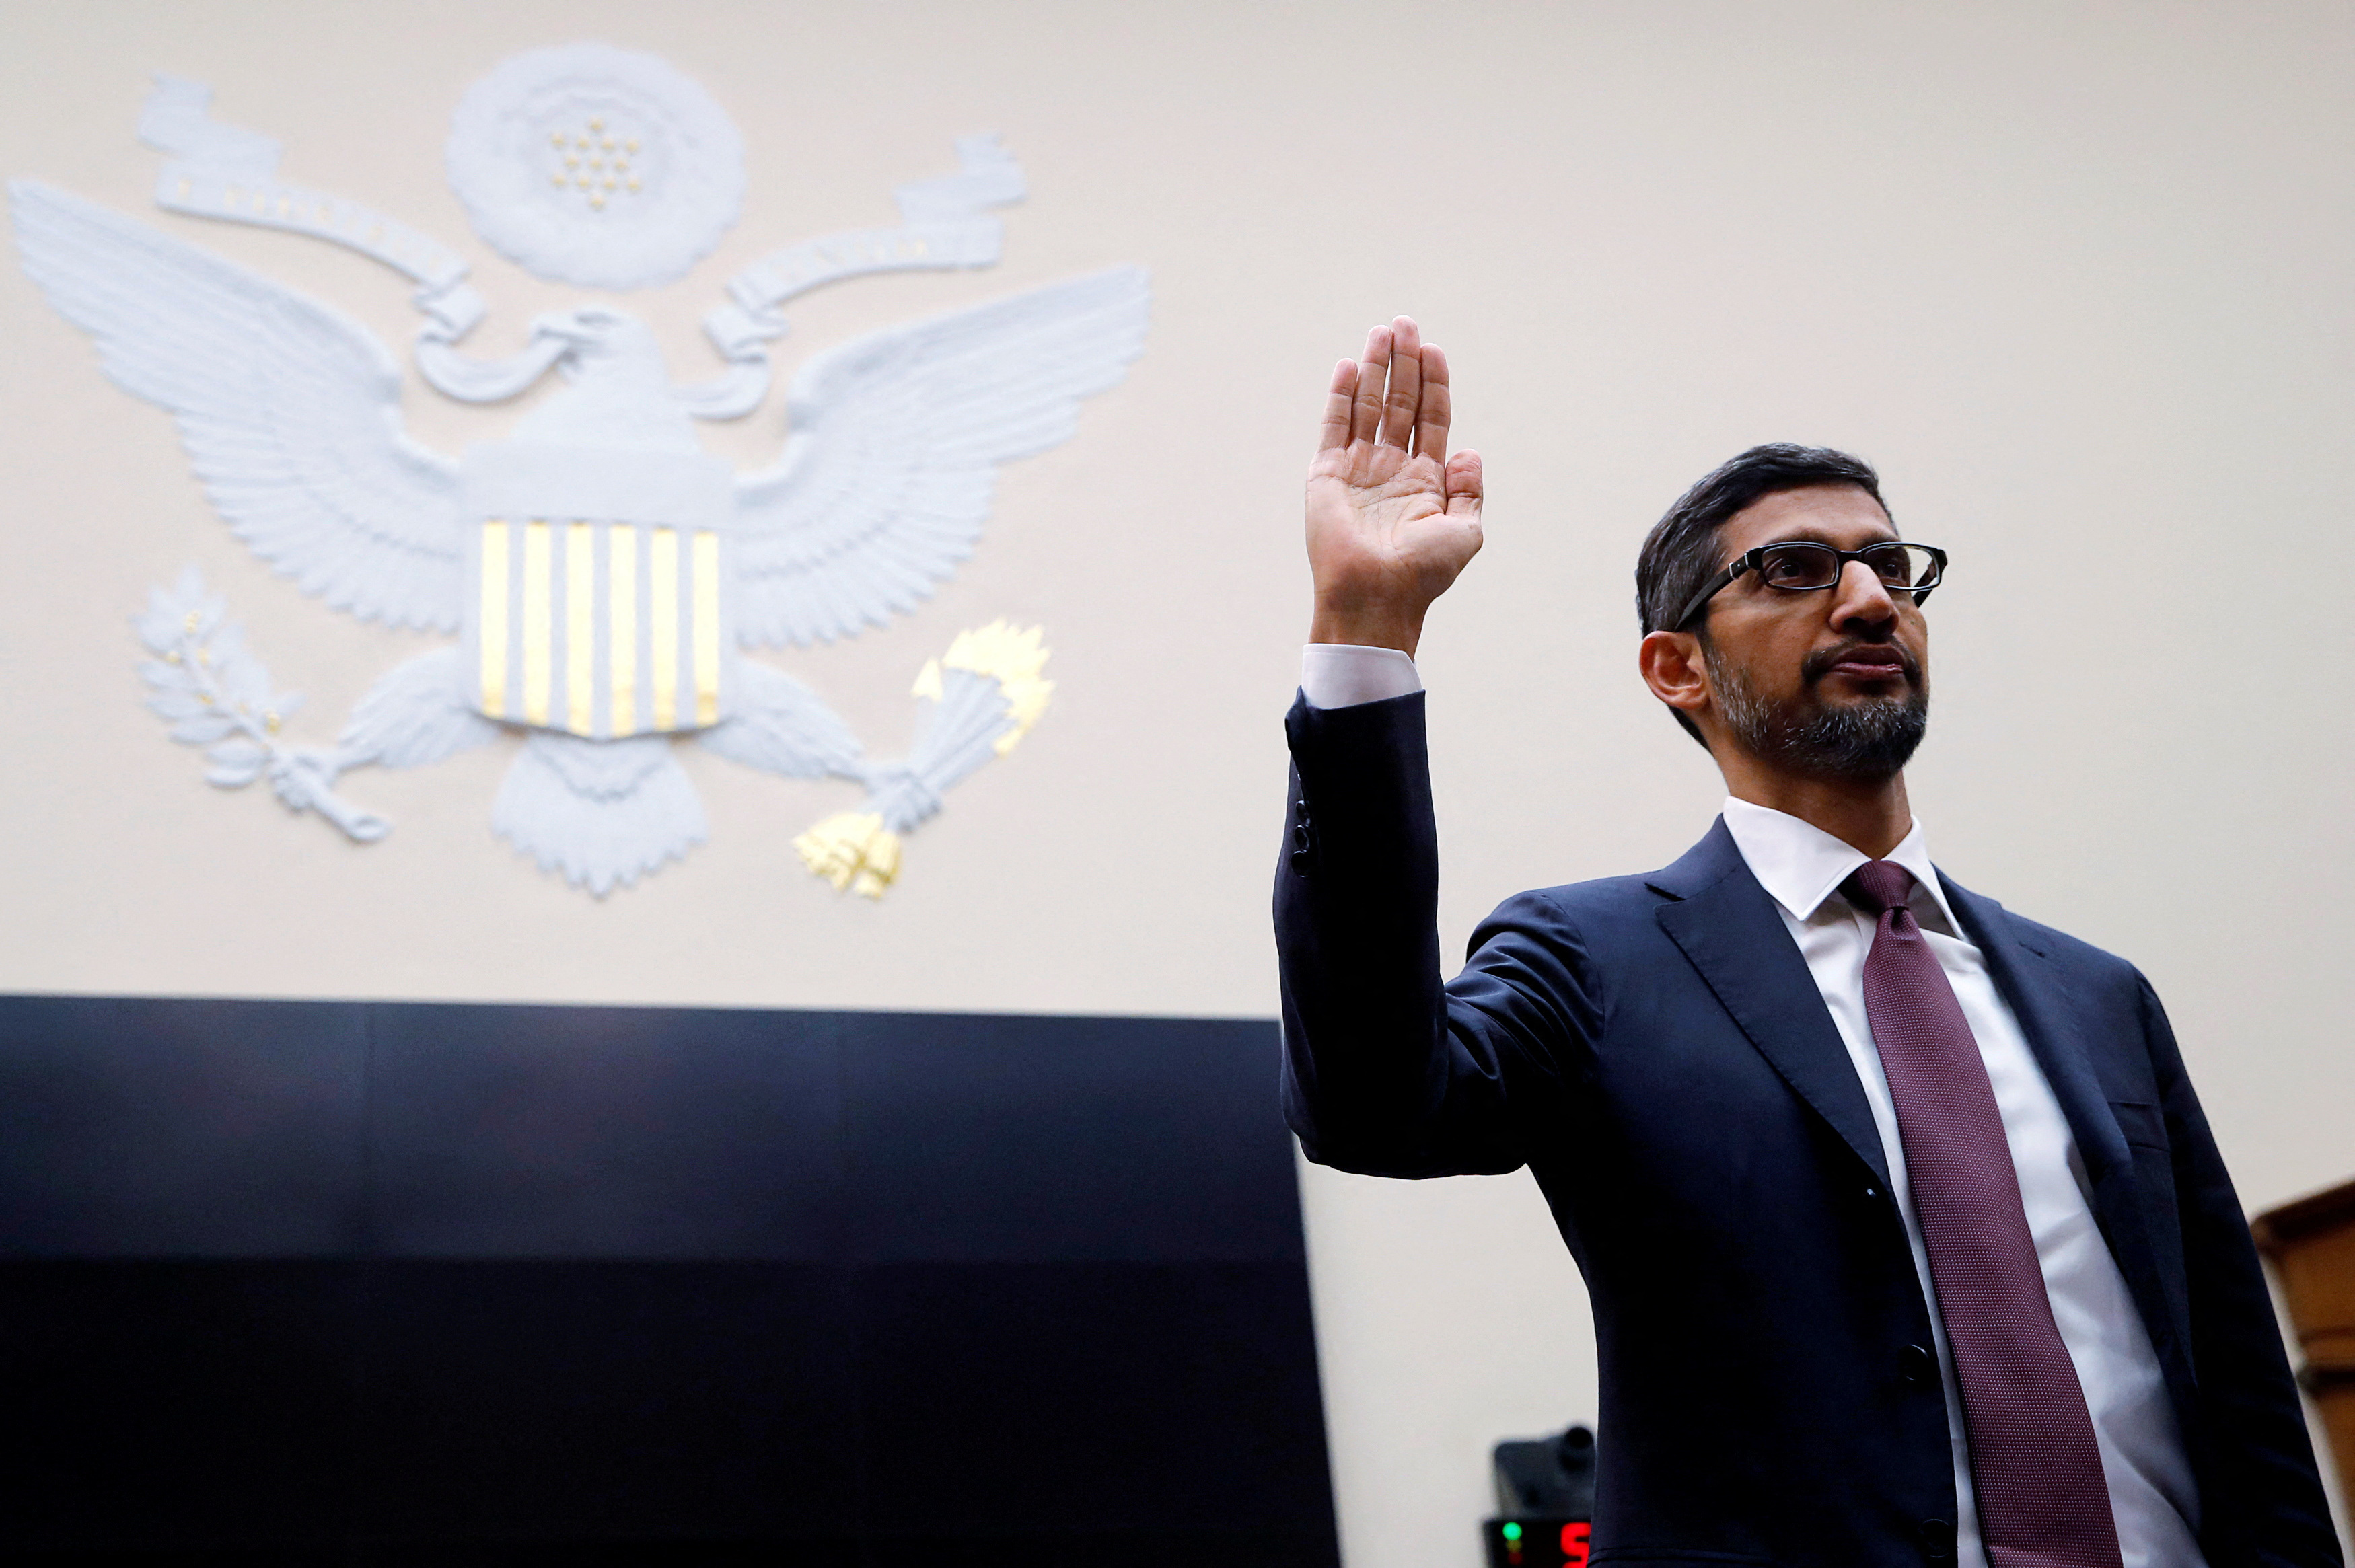 Google CEO Pichai testifies at House Judiciary Committee hearing on Capitol Hill in Washington